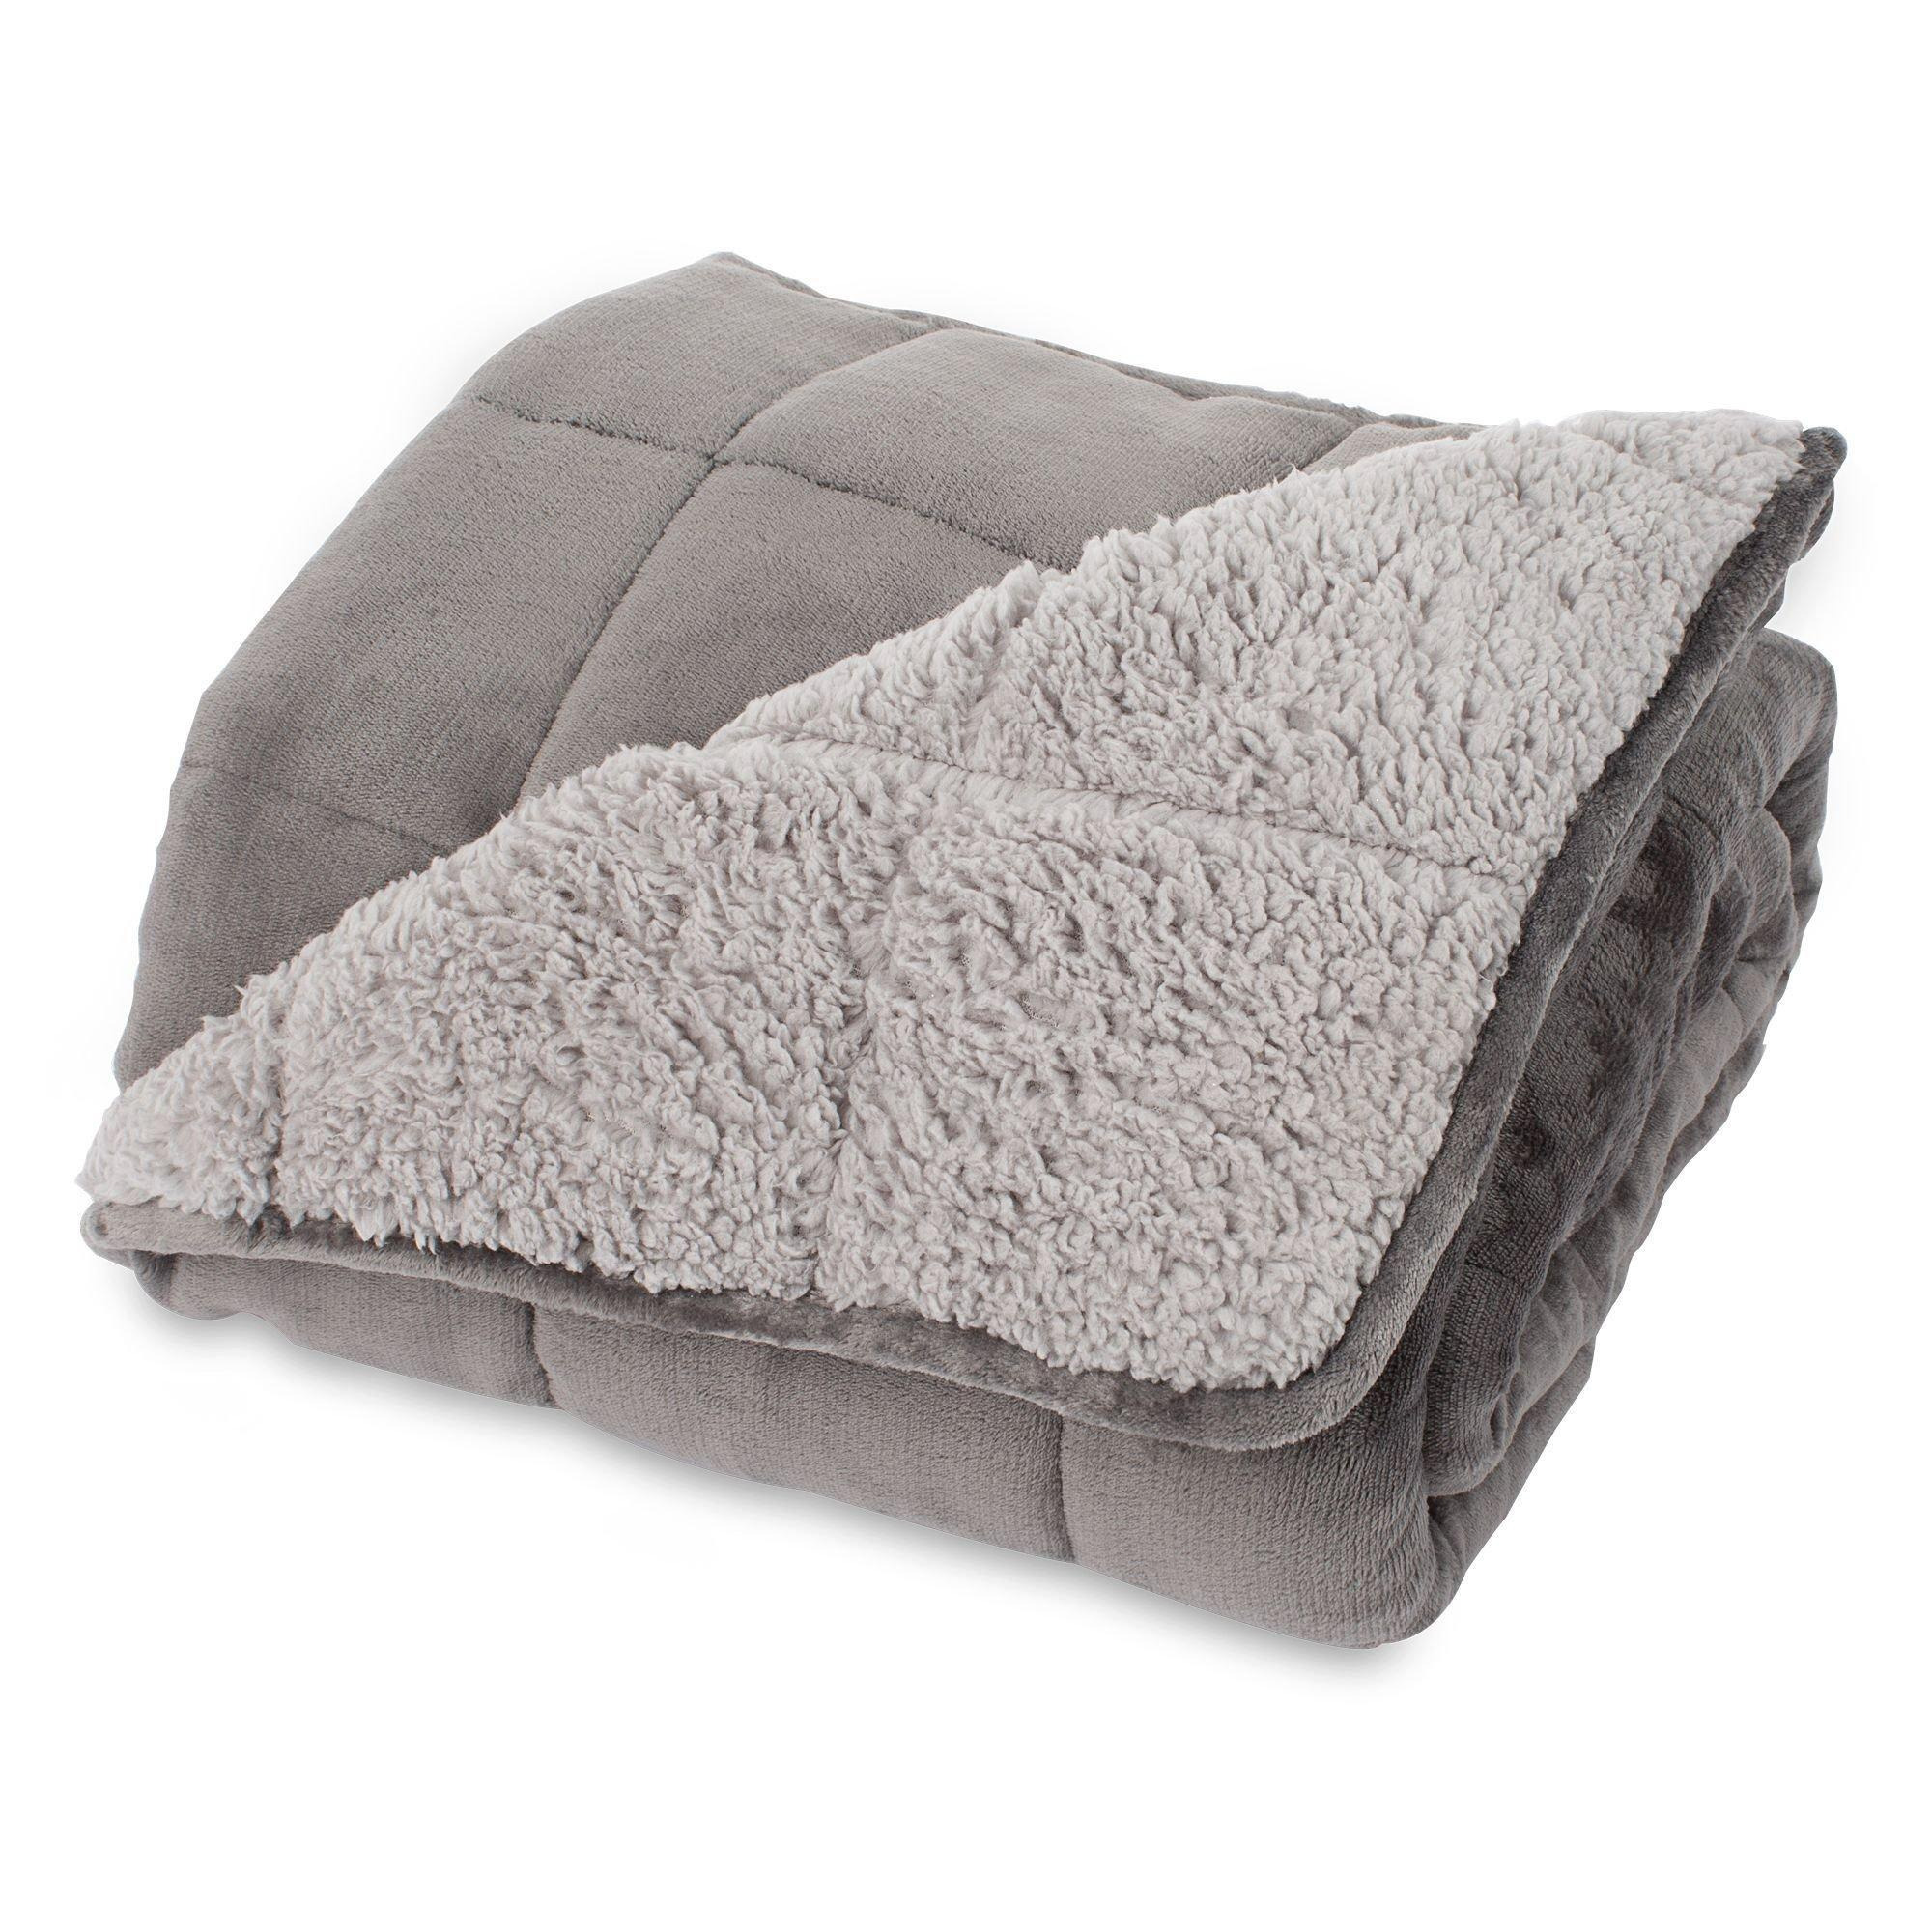 Weighted Sherpa Throw Blanket - image 1